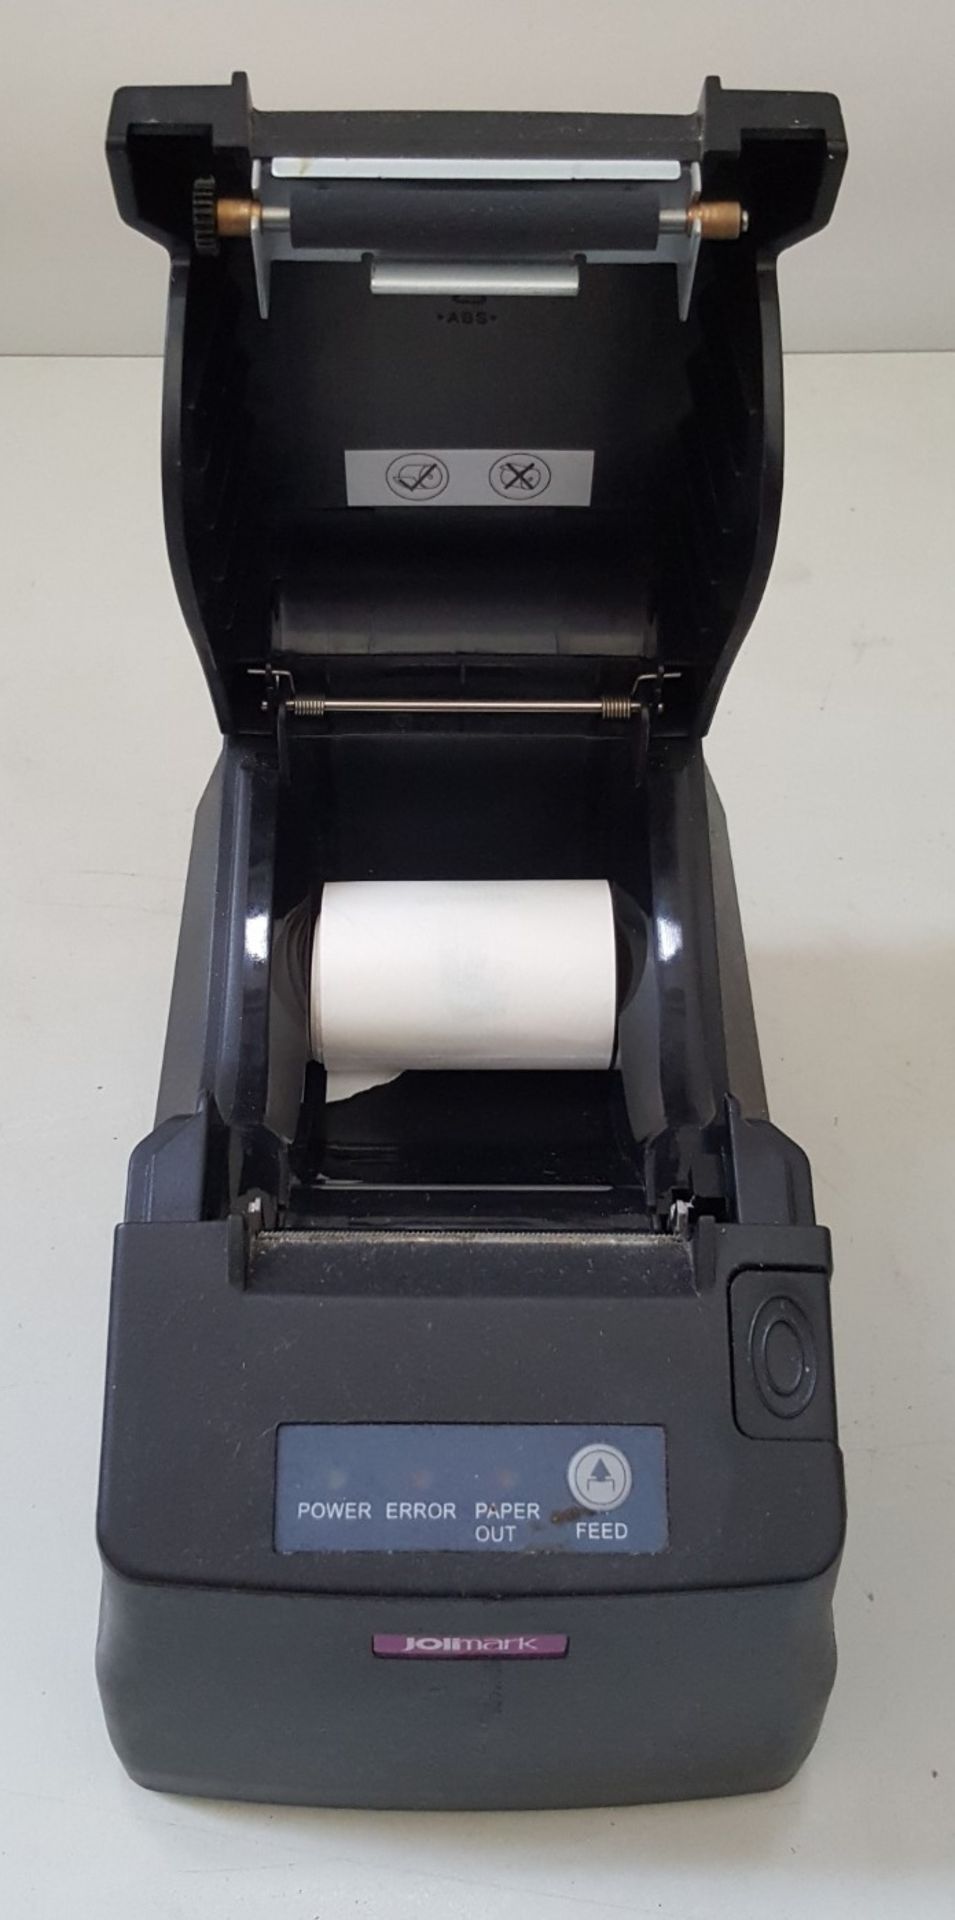 1 x Jolimark TP510 Thermal Printer With Bluetooth & USB interface - Ref BY208 - Image 3 of 4